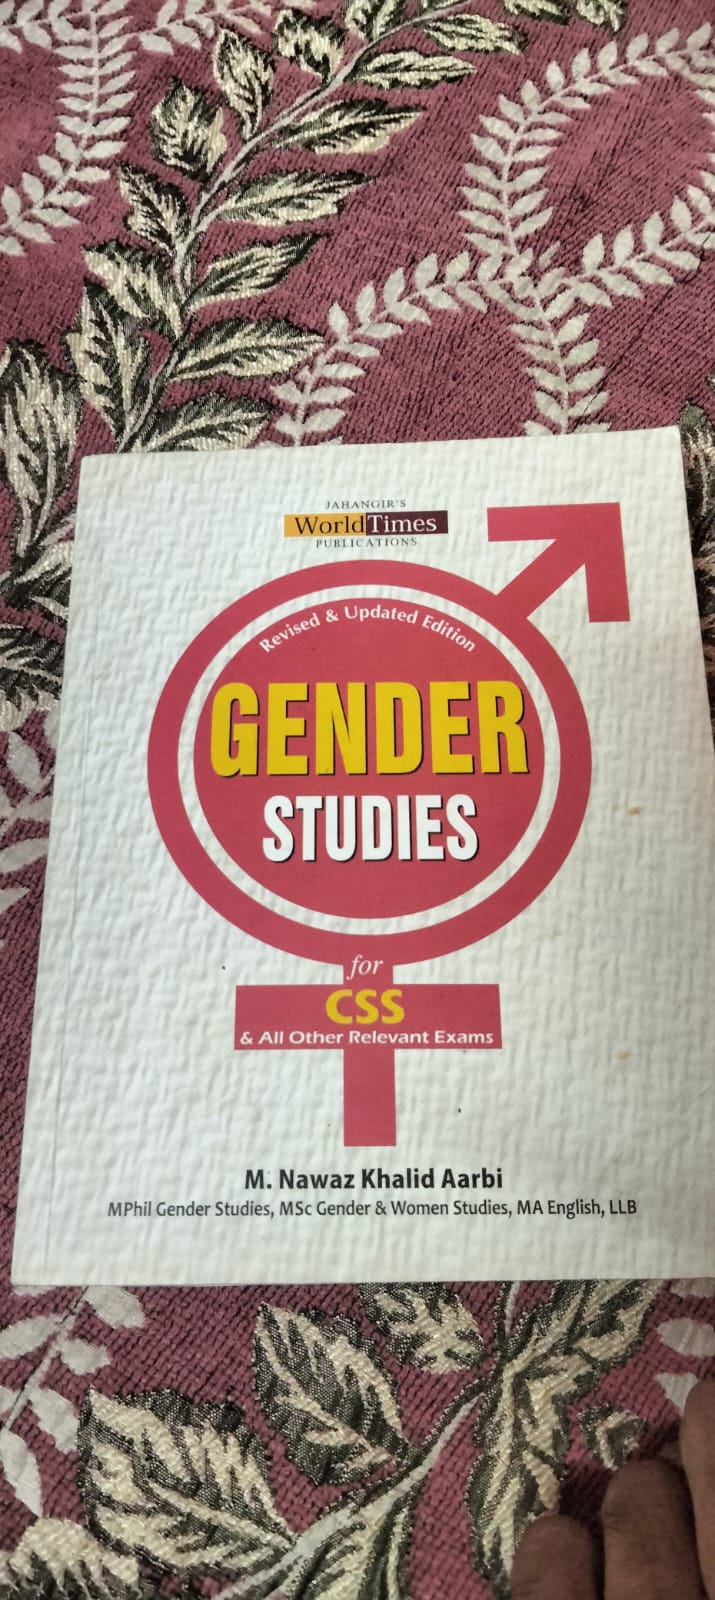 Gender Studies for Css and other relevant examinat